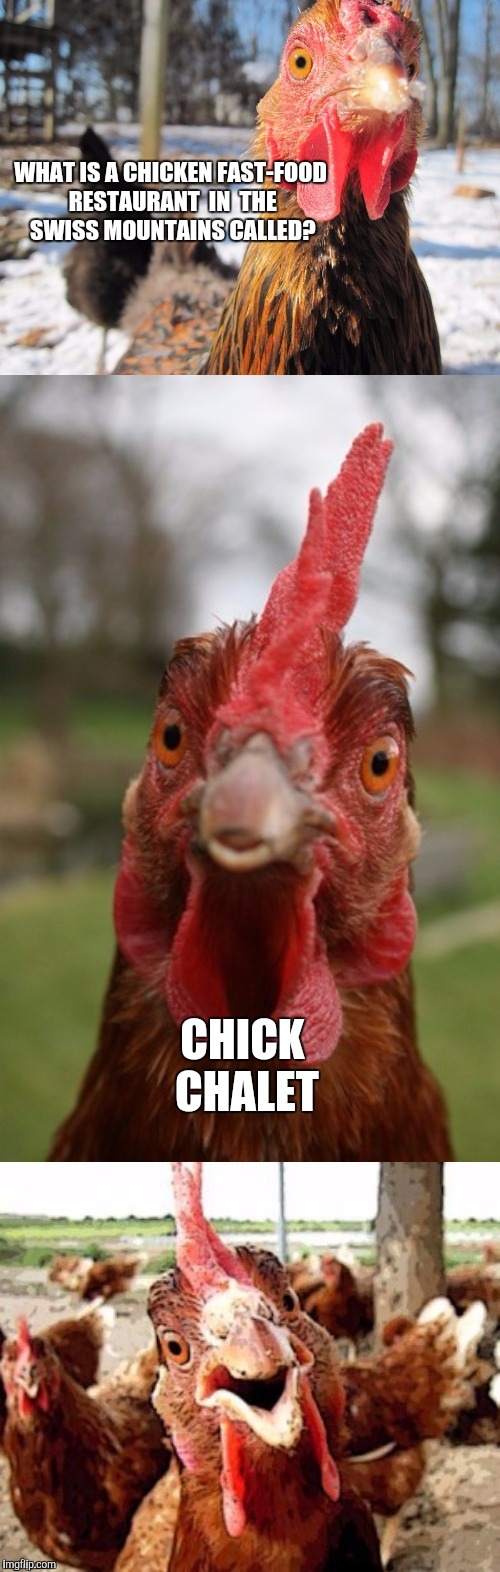 bad pun chicken | WHAT IS A CHICKEN FAST-FOOD RESTAURANT  IN 
THE SWISS MOUNTAINS CALLED? CHICK CHALET | image tagged in bad pun chicken,chicken week,joke | made w/ Imgflip meme maker